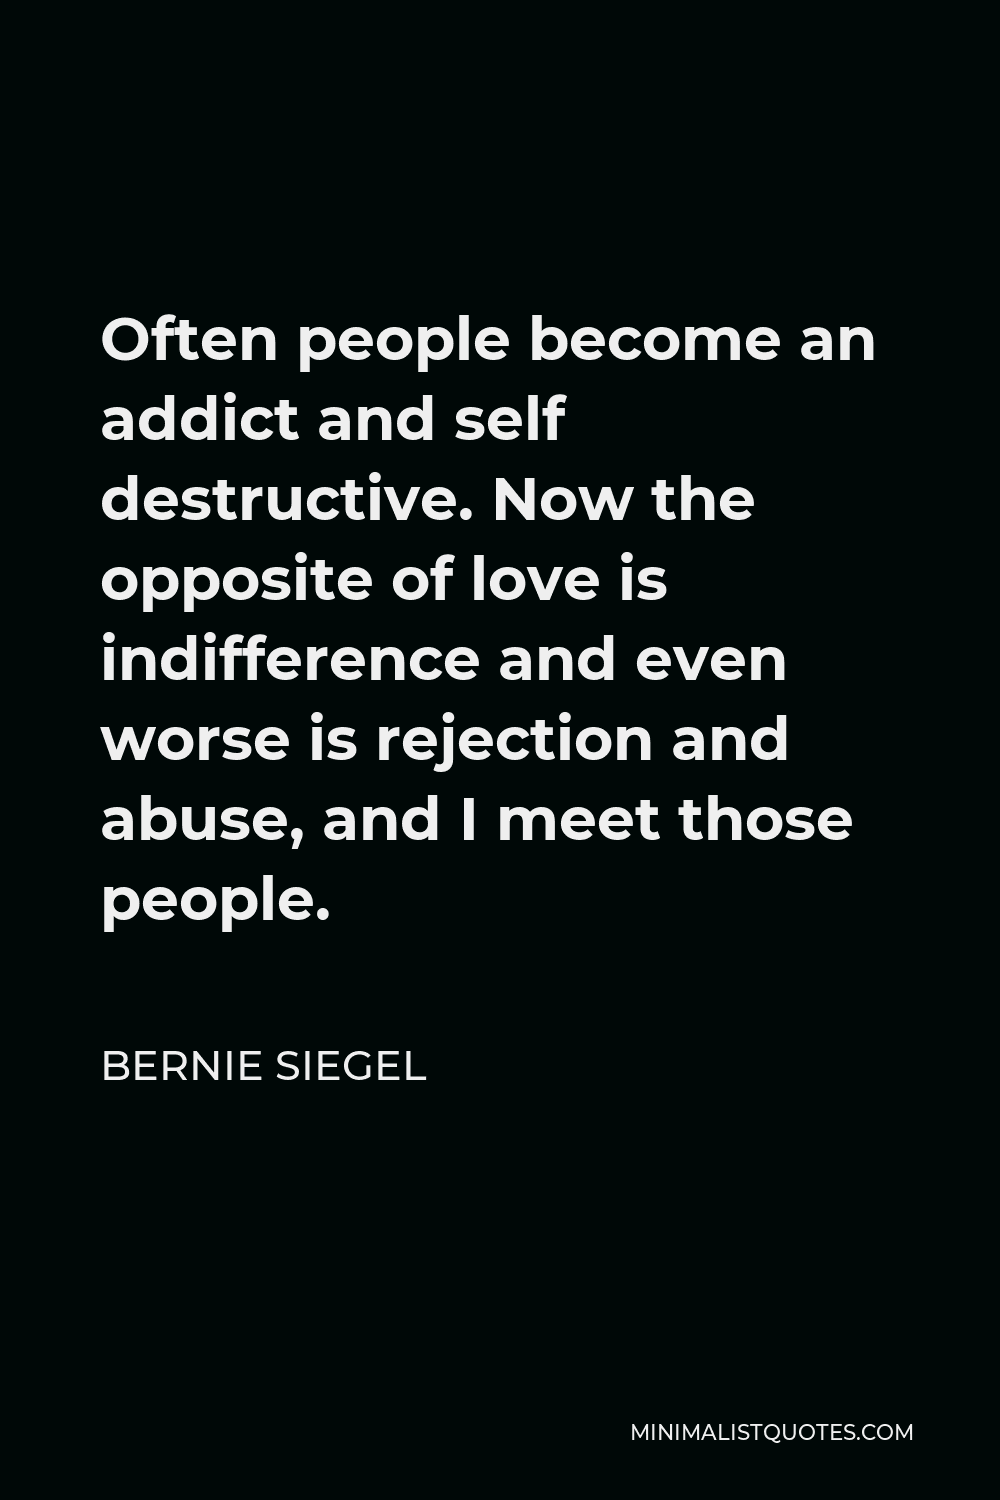 Bernie Siegel Quote - Often people become an addict and self destructive. Now the opposite of love is indifference and even worse is rejection and abuse, and I meet those people.